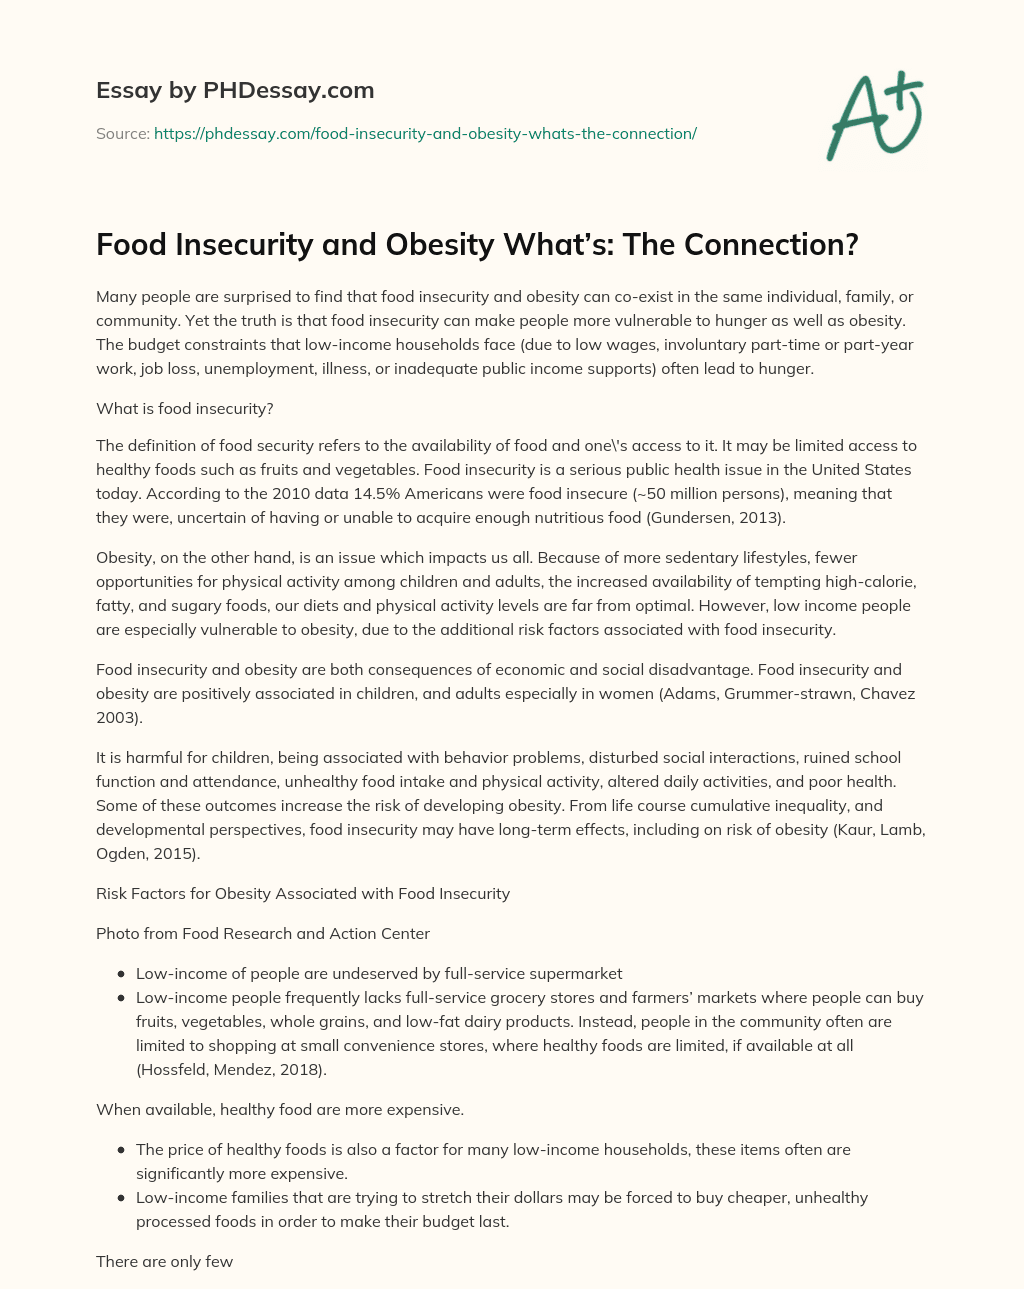 Food Insecurity and Obesity What’s: The Connection? essay